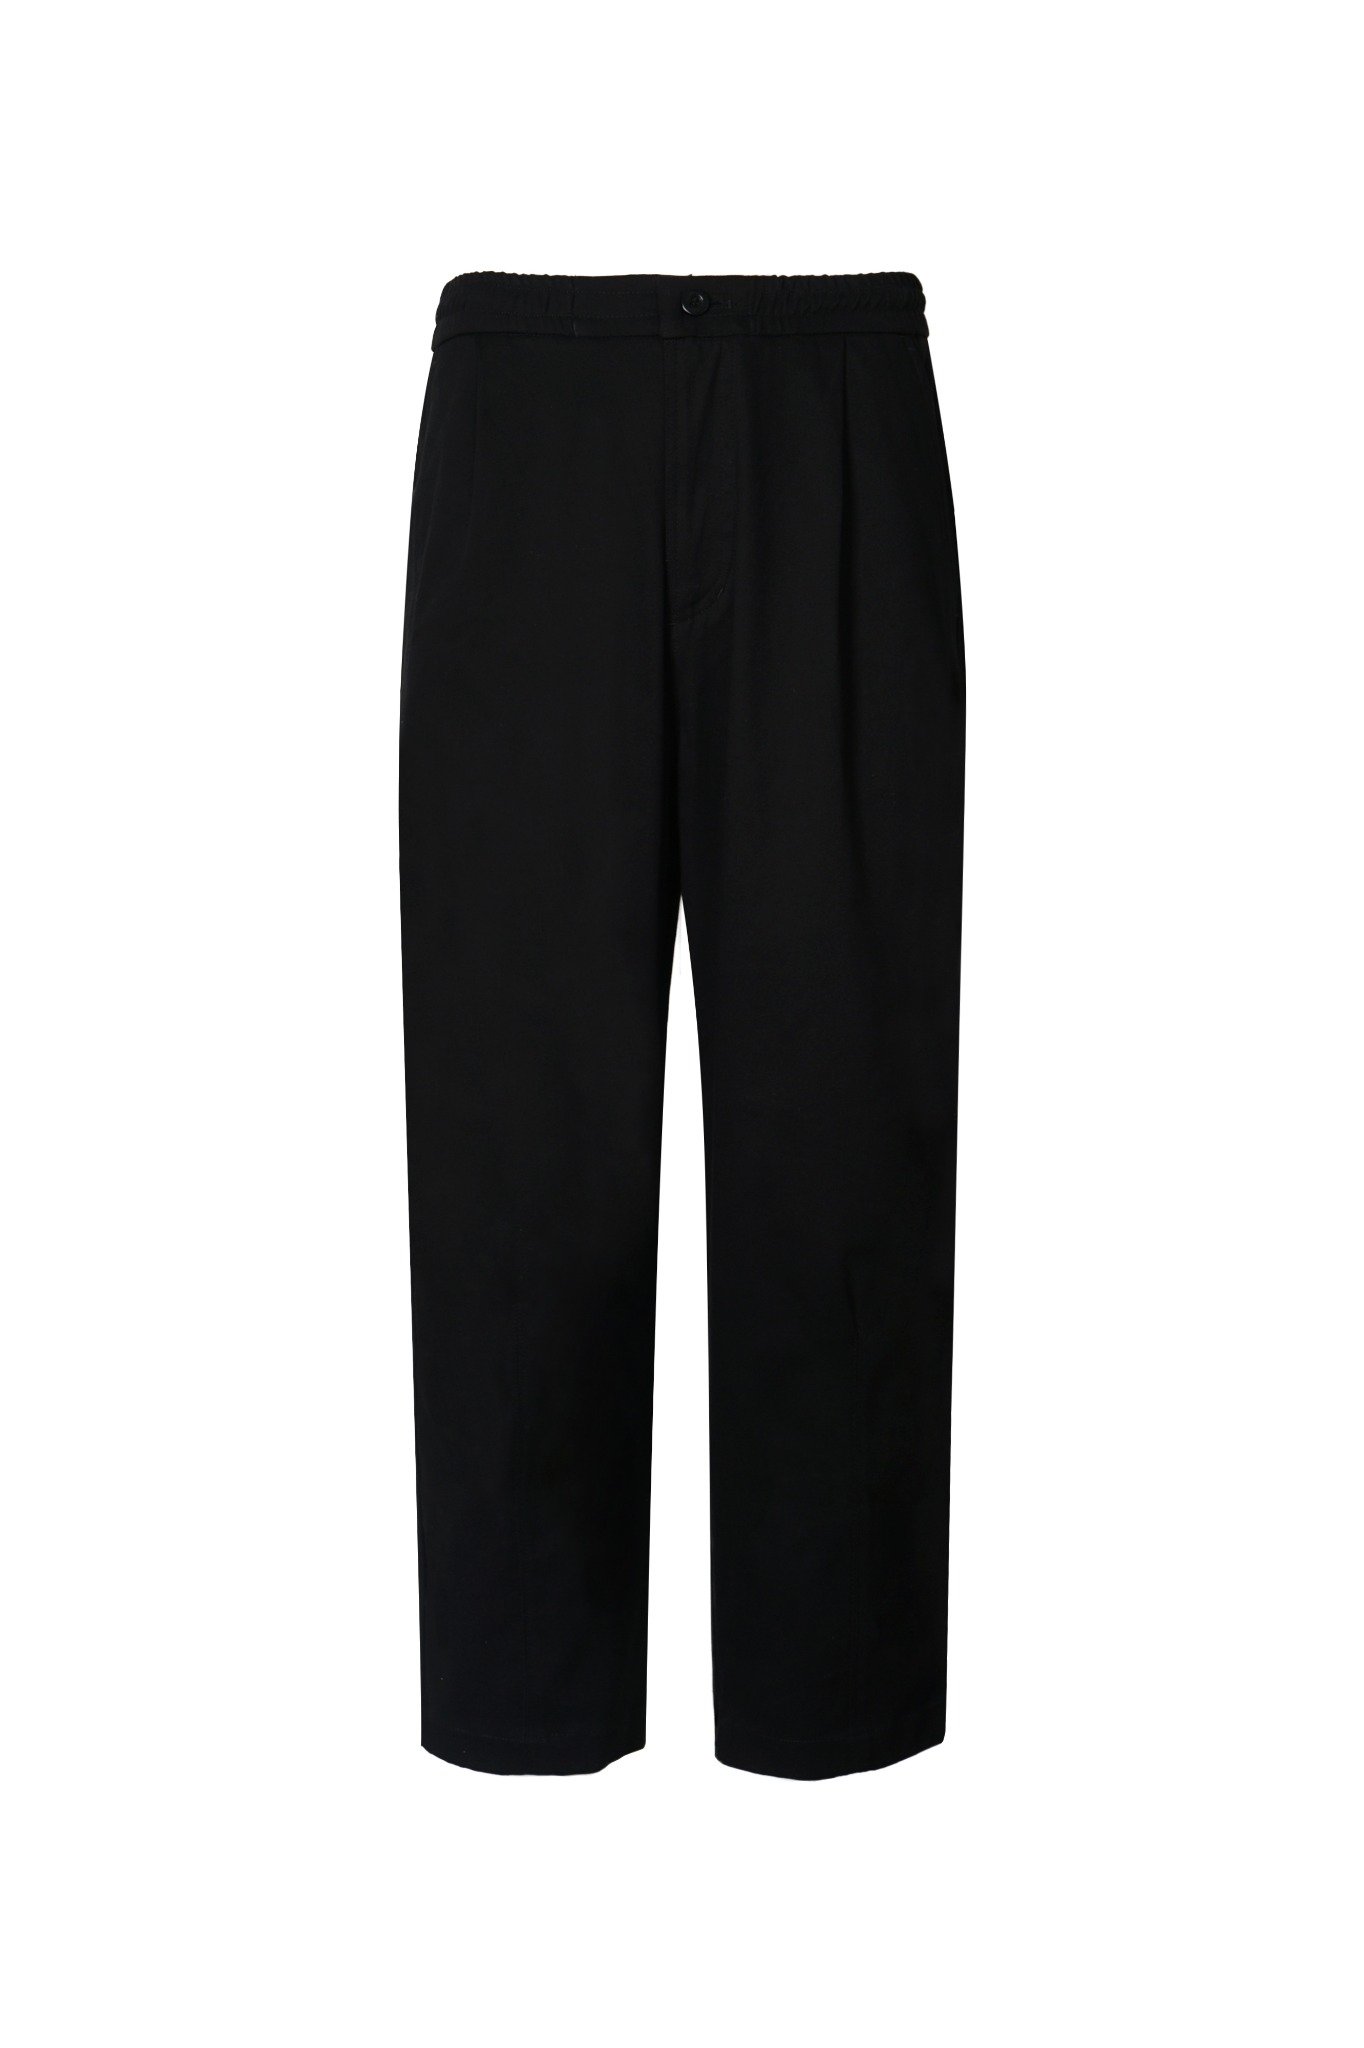  BLACK TAPERED PANTS 